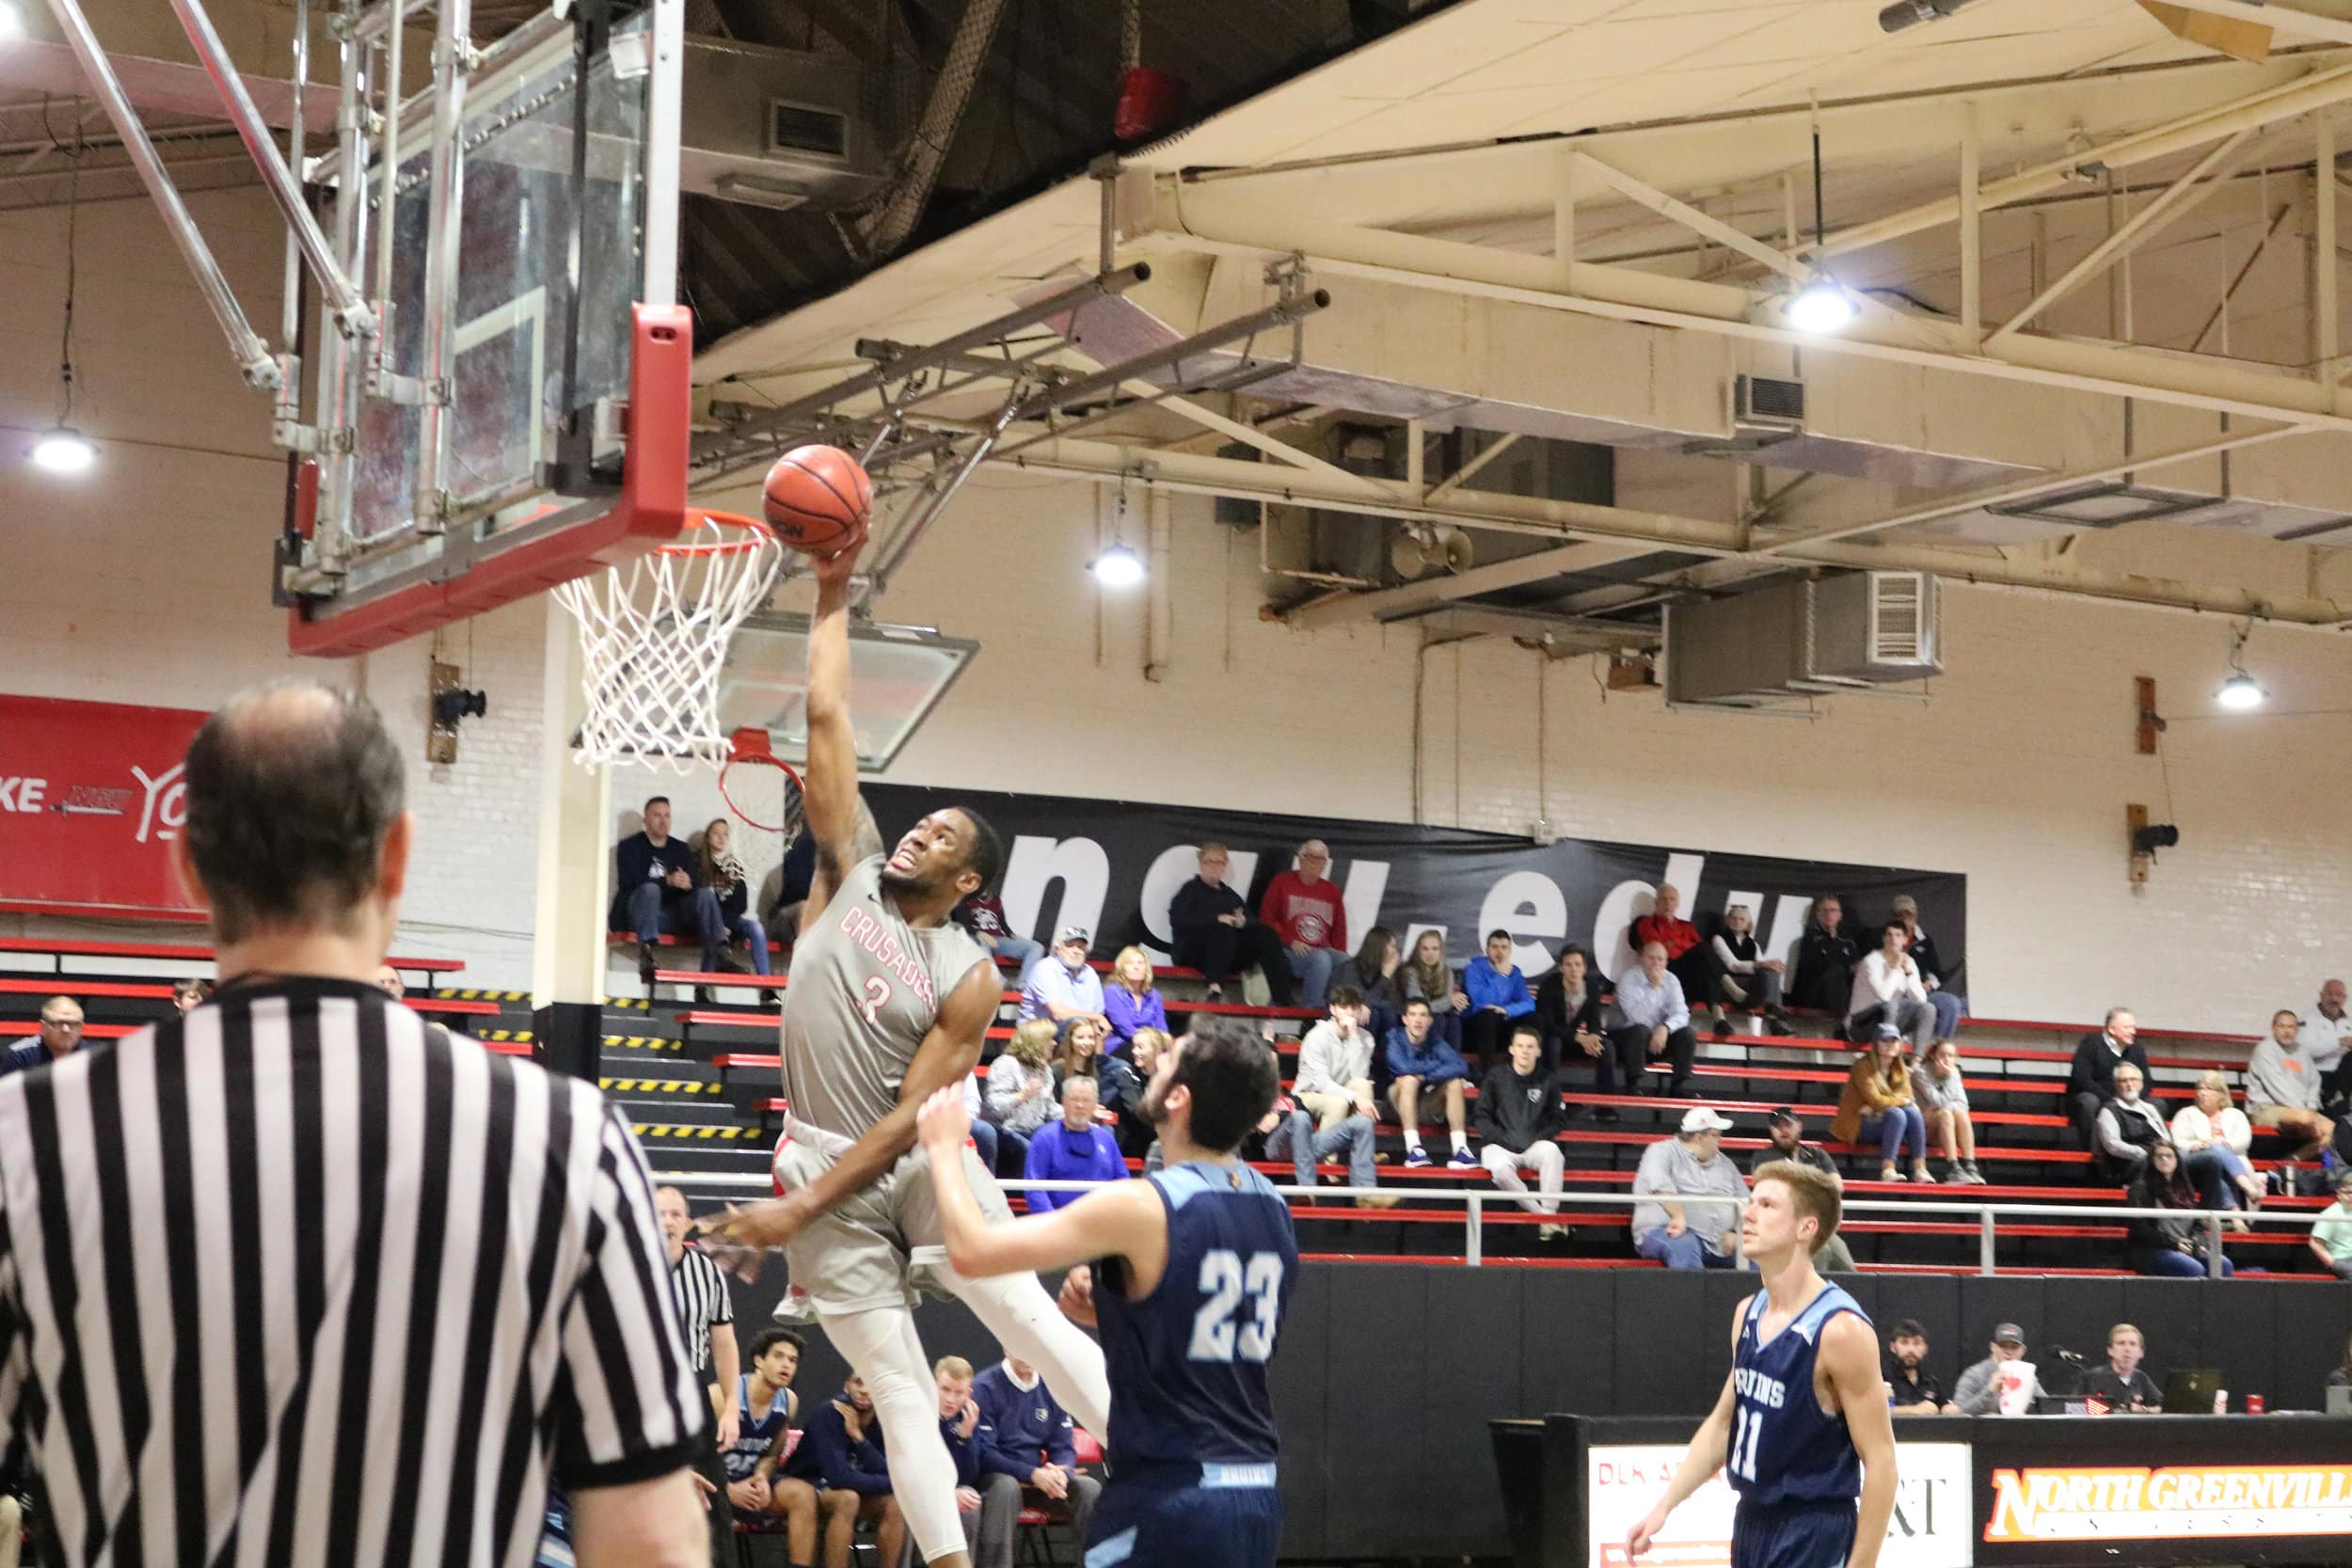 Tate (3) dunks the ball during the first half of the game.